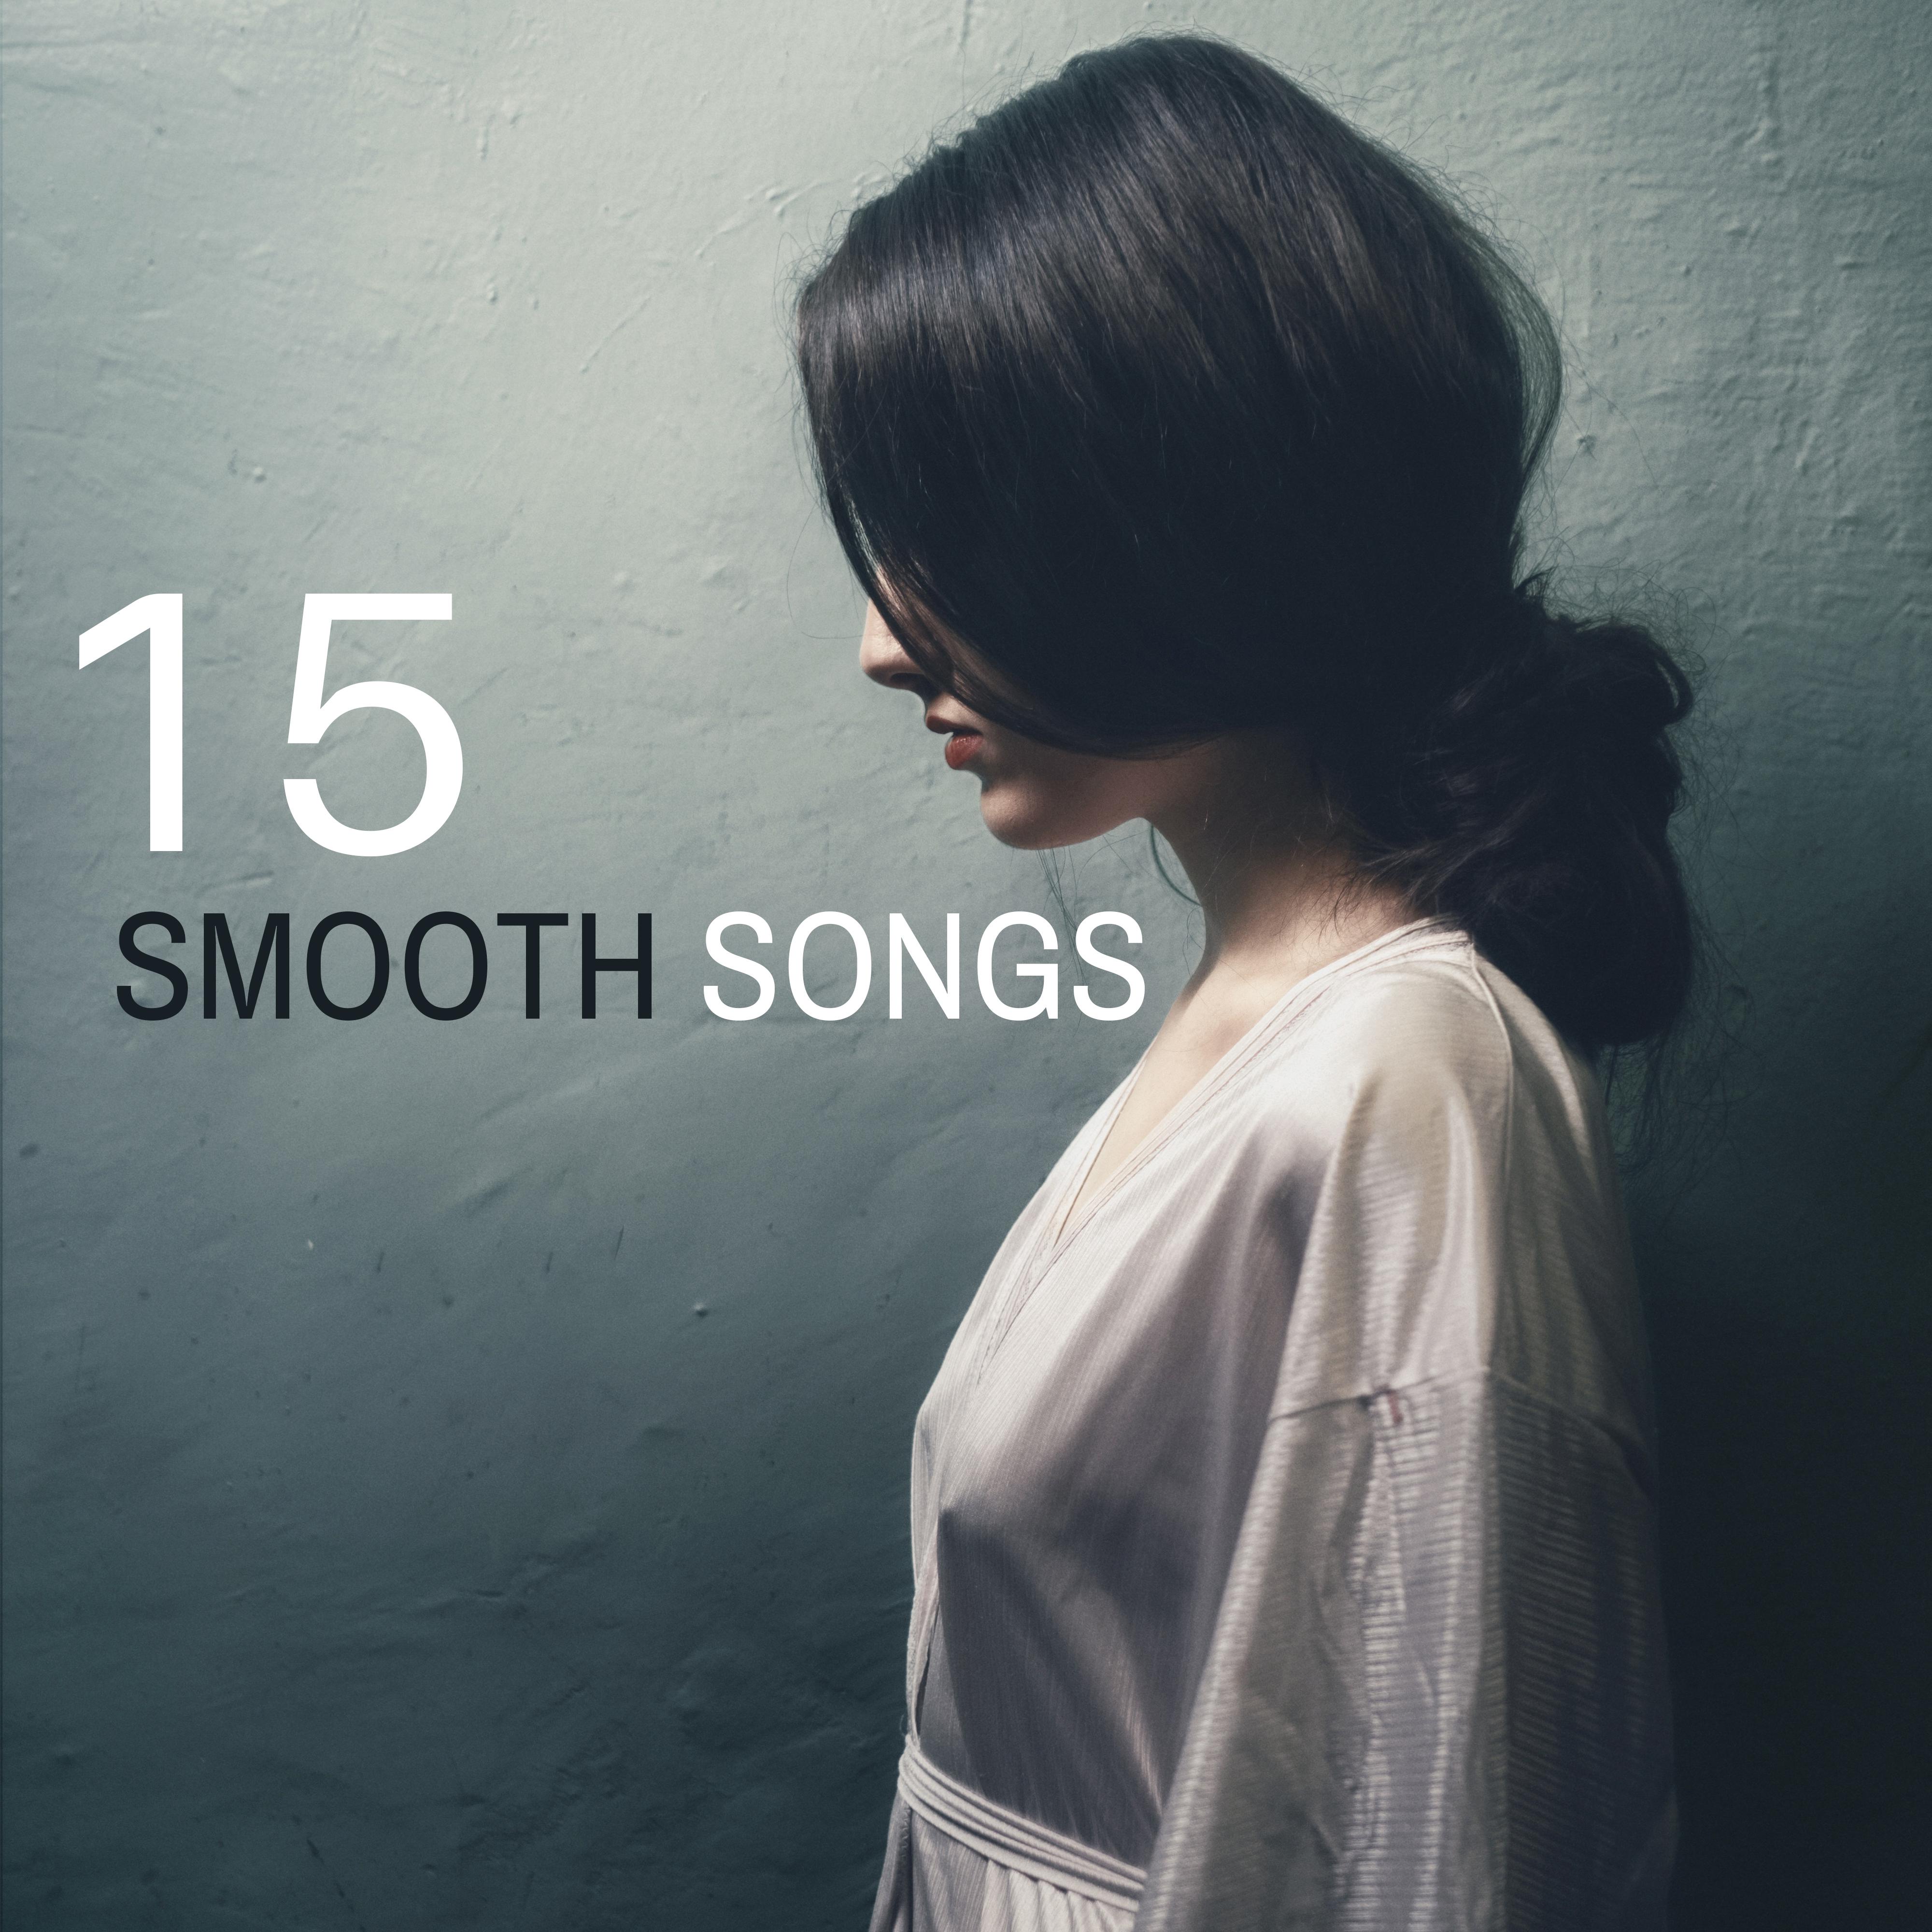 15 Smooth Songs